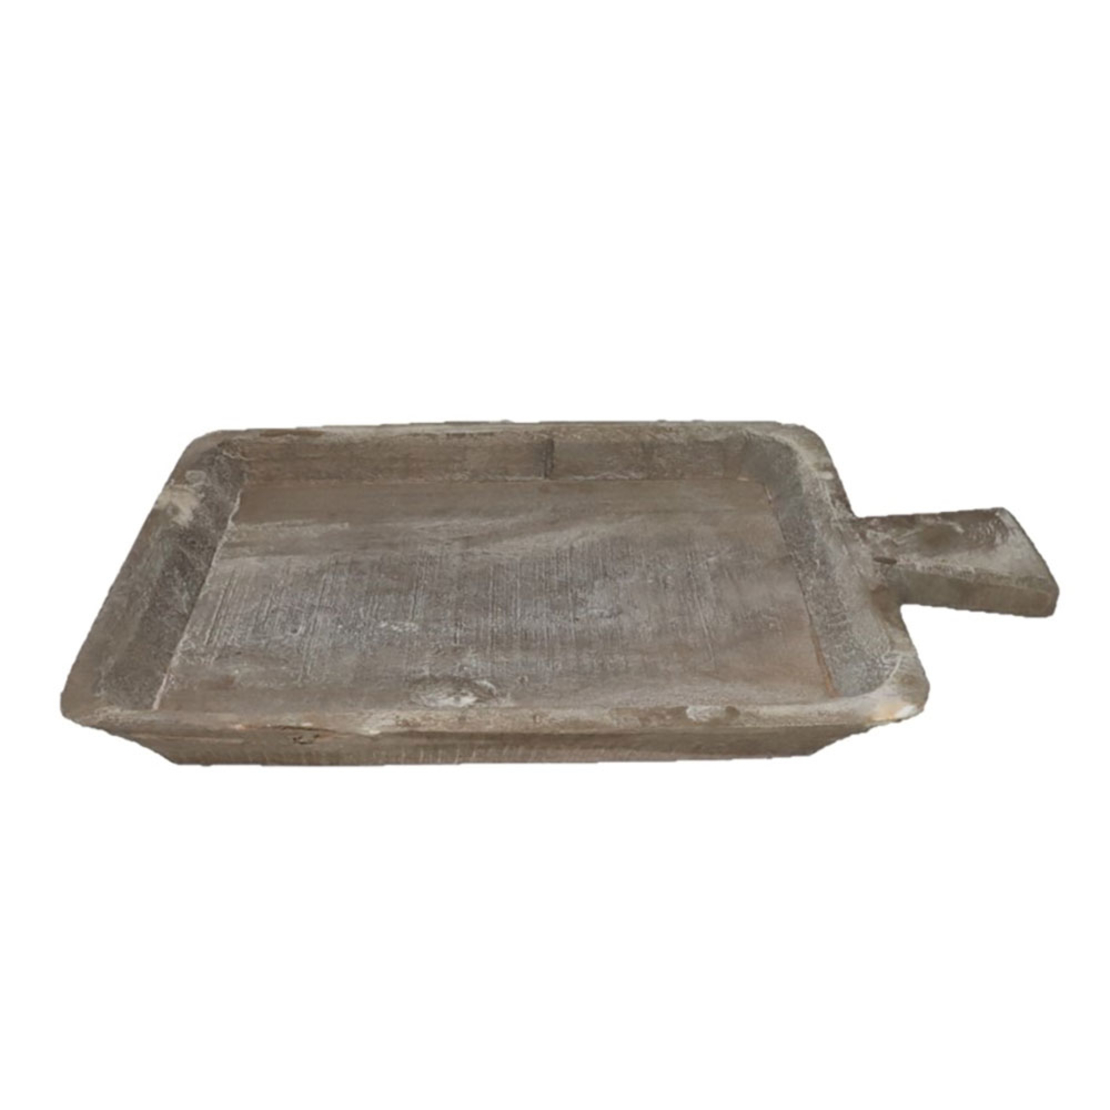 INDI PLATTER WOOD NATURAL ANTIQUE 41x26xH4,5cm IN